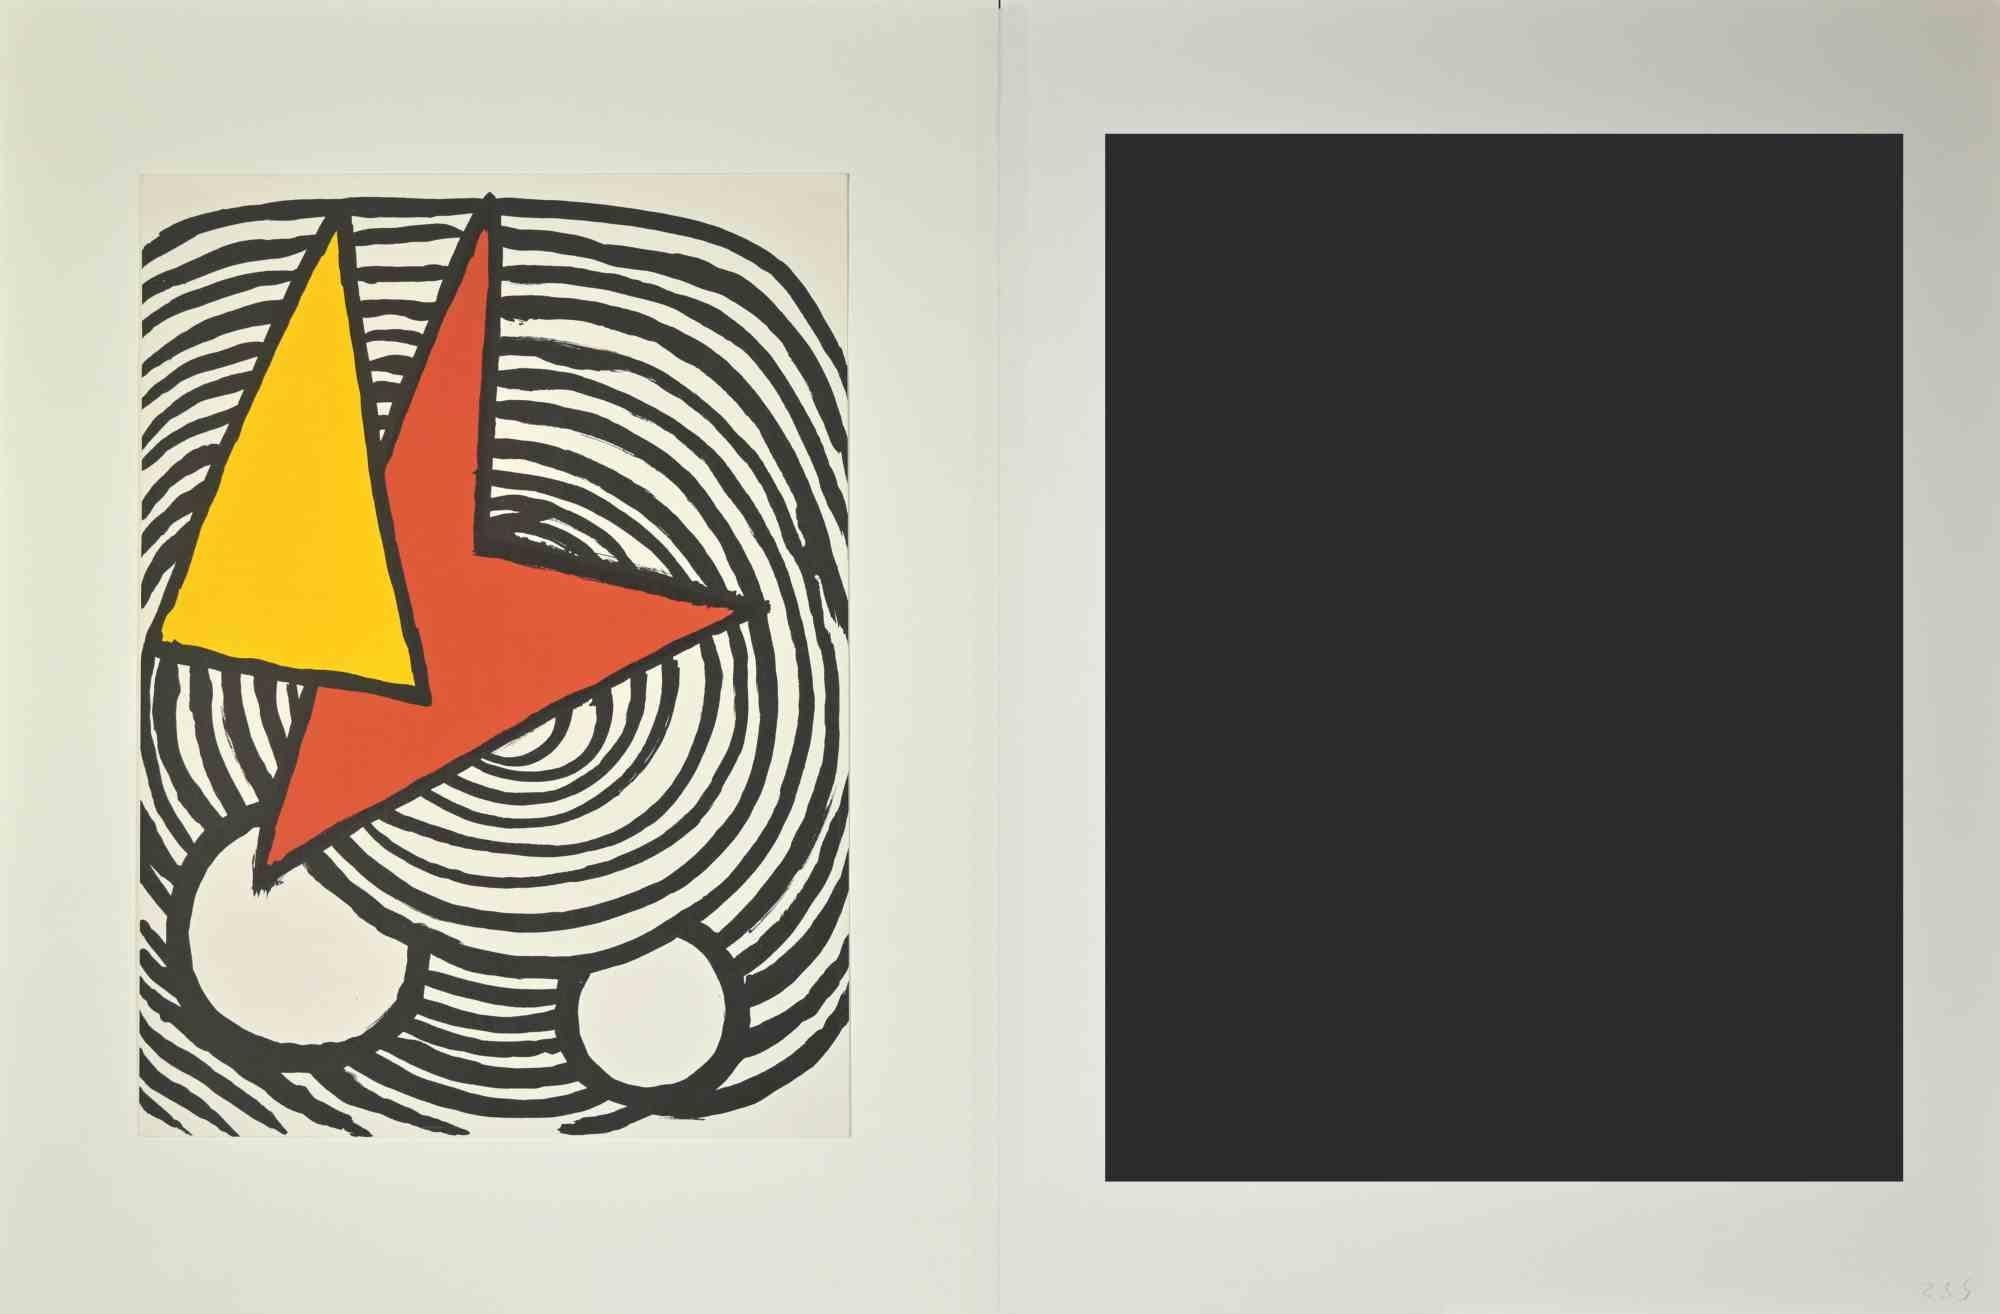 Trangle et Quadrilatere is a Lithograph realized in 1973 by Alexander Calder.

From Derrière Le Miroir.

Very good condition including a white cardboard passpartout (52 x 41 cm).

Alexander Calder ( July 22, 1898 – November 11, 1976) was an American